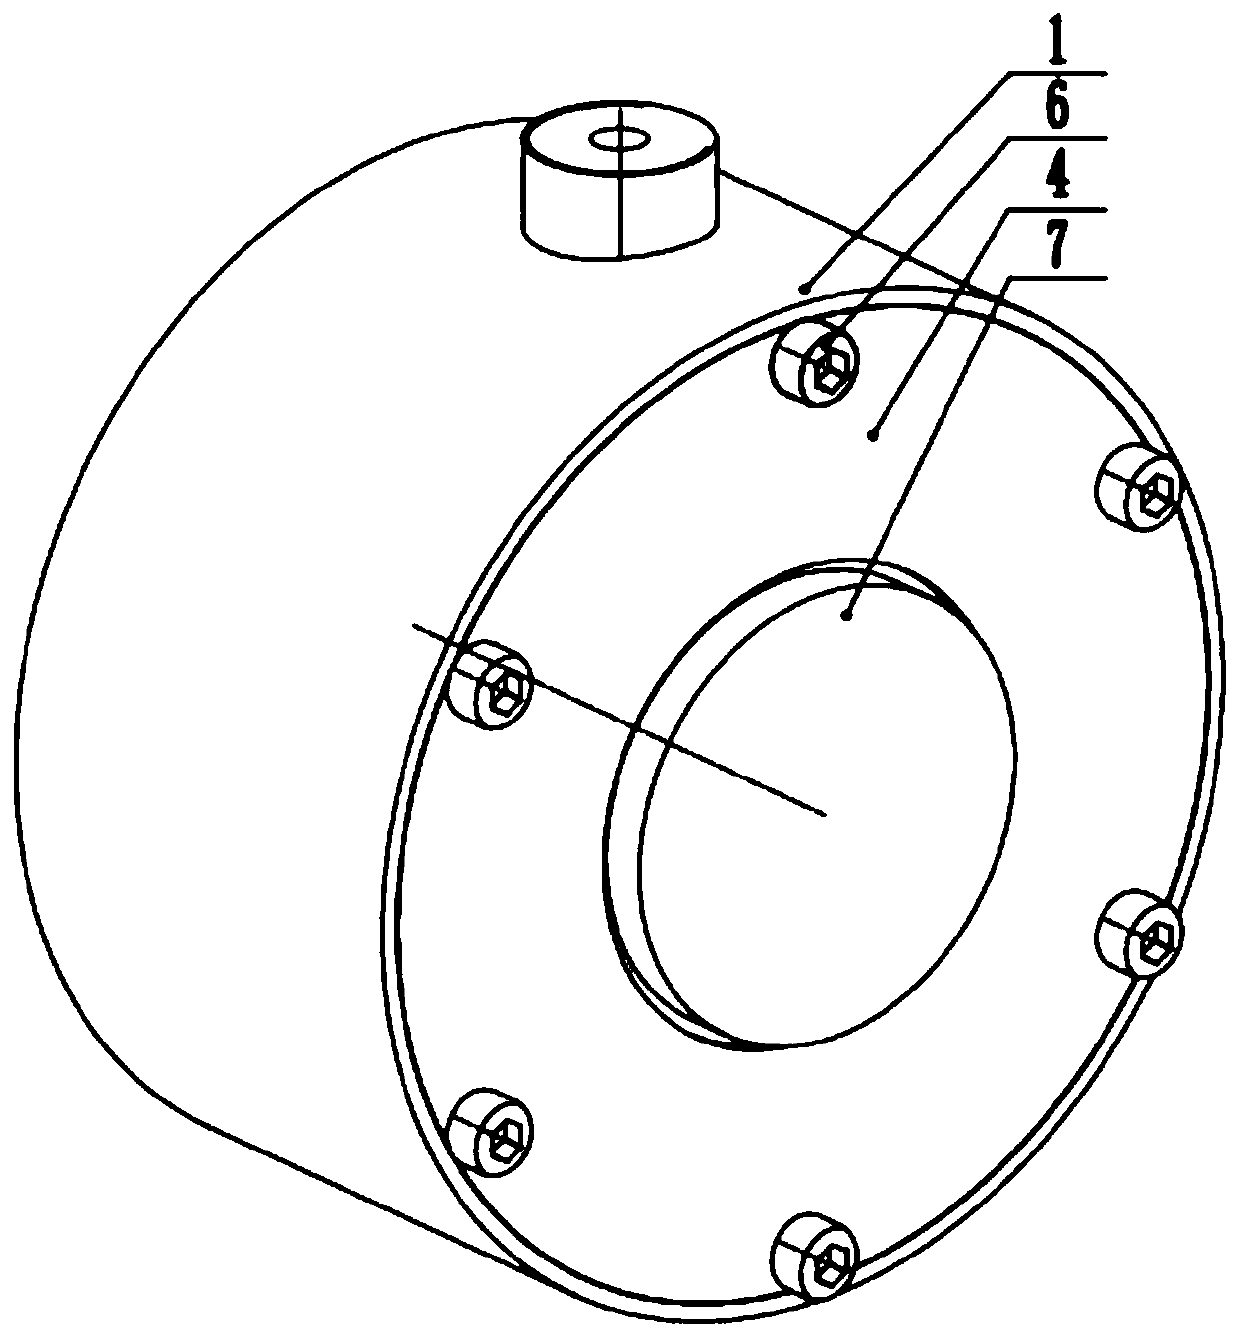 Static pressure type radial gas bearing structure